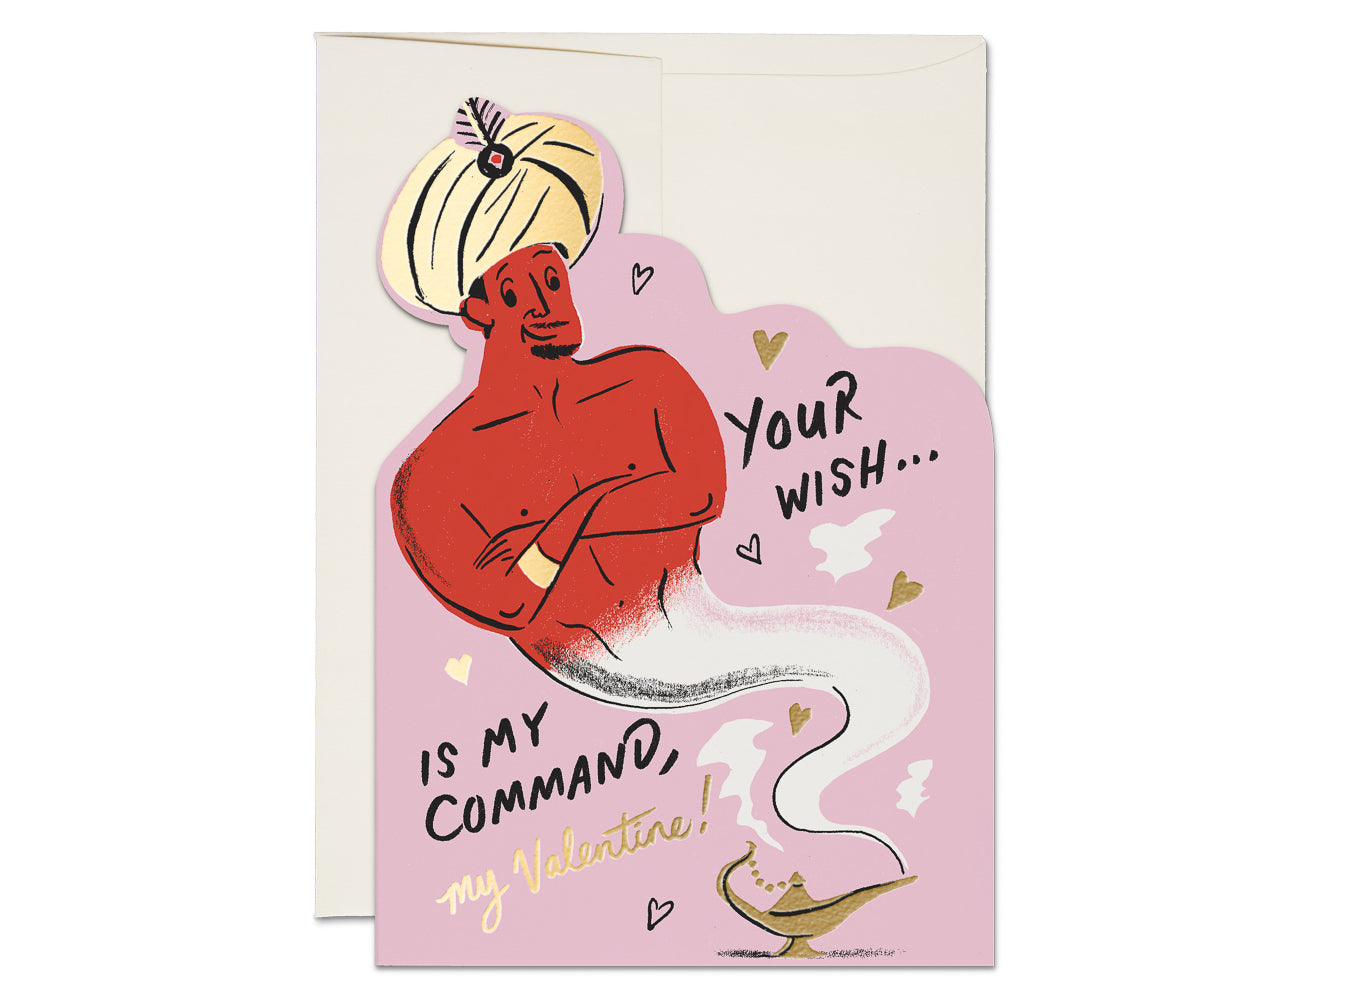 illustrated genie coming out of lamp text reads your wish...is my command, my valentine!